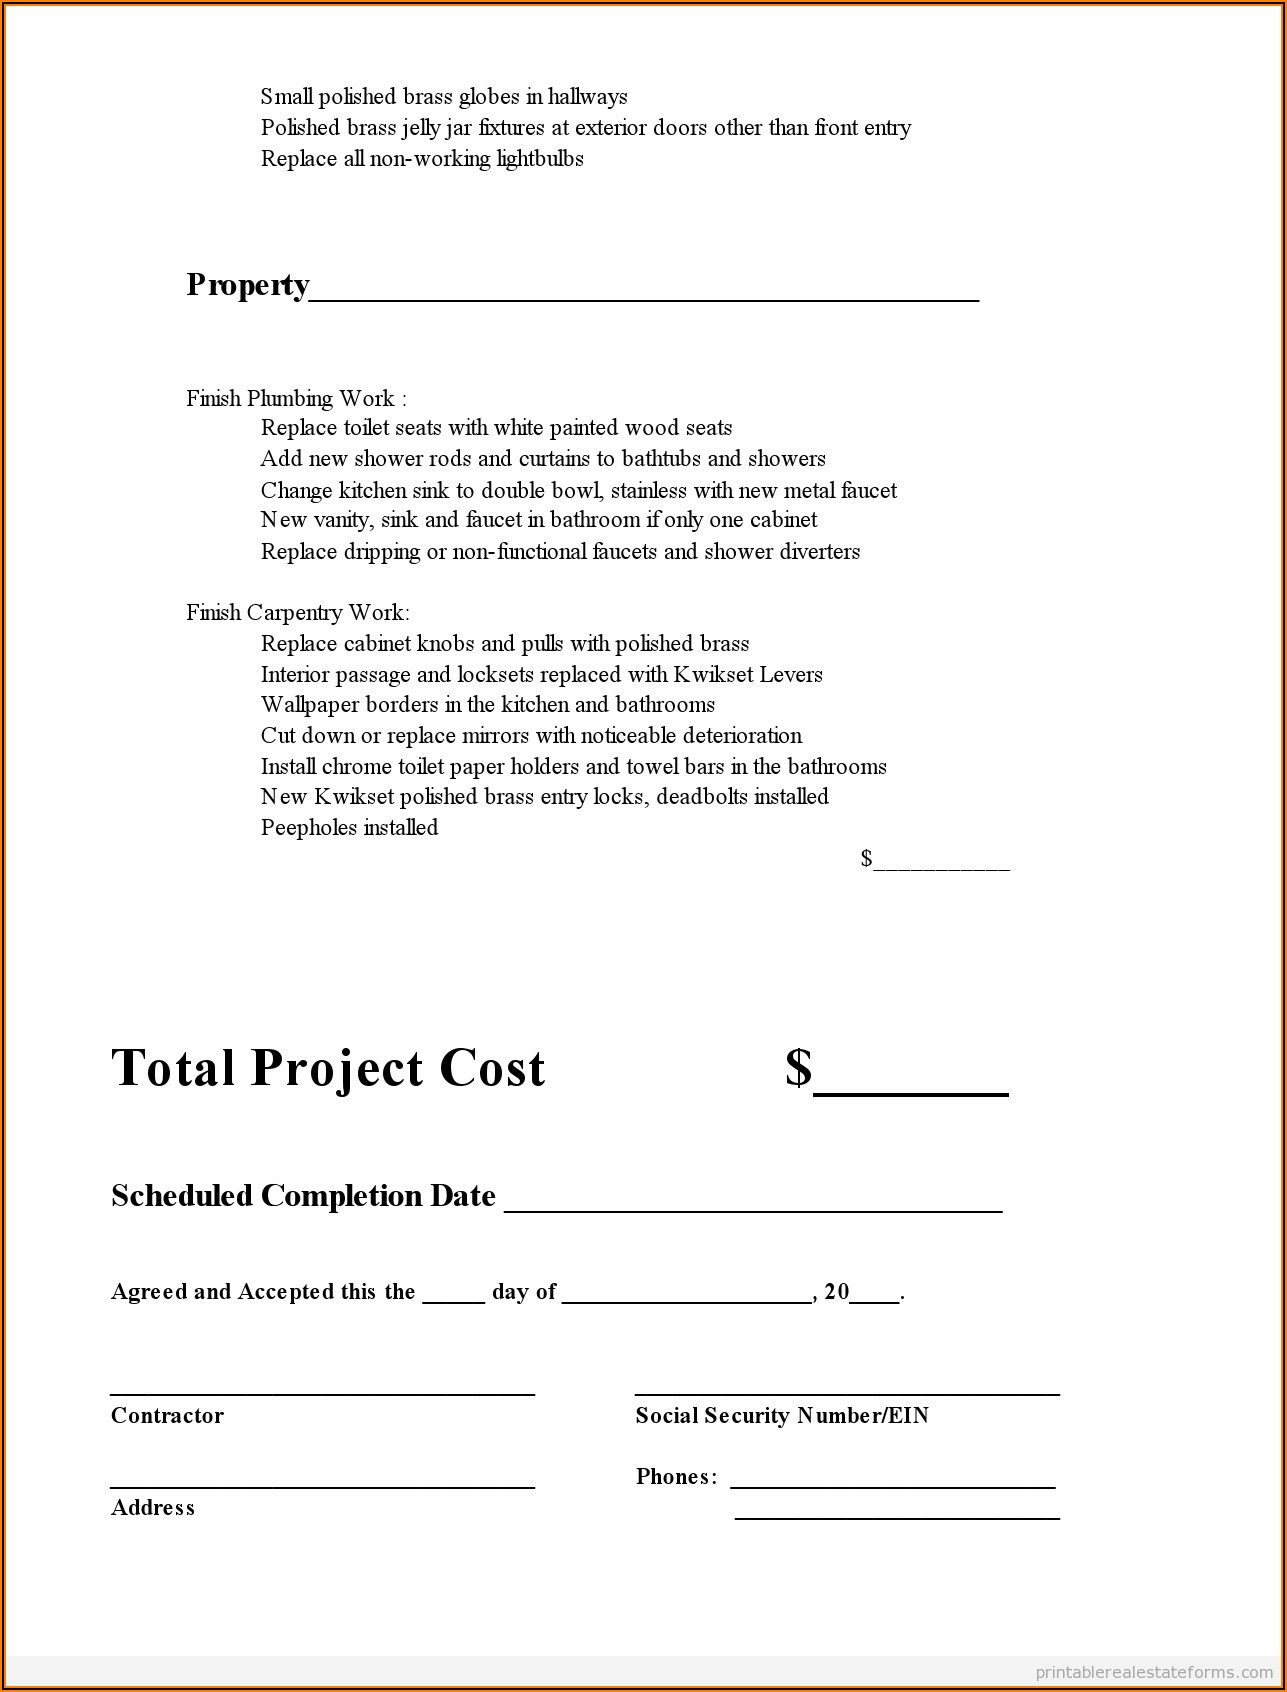 Subcontractor Agreement Forms